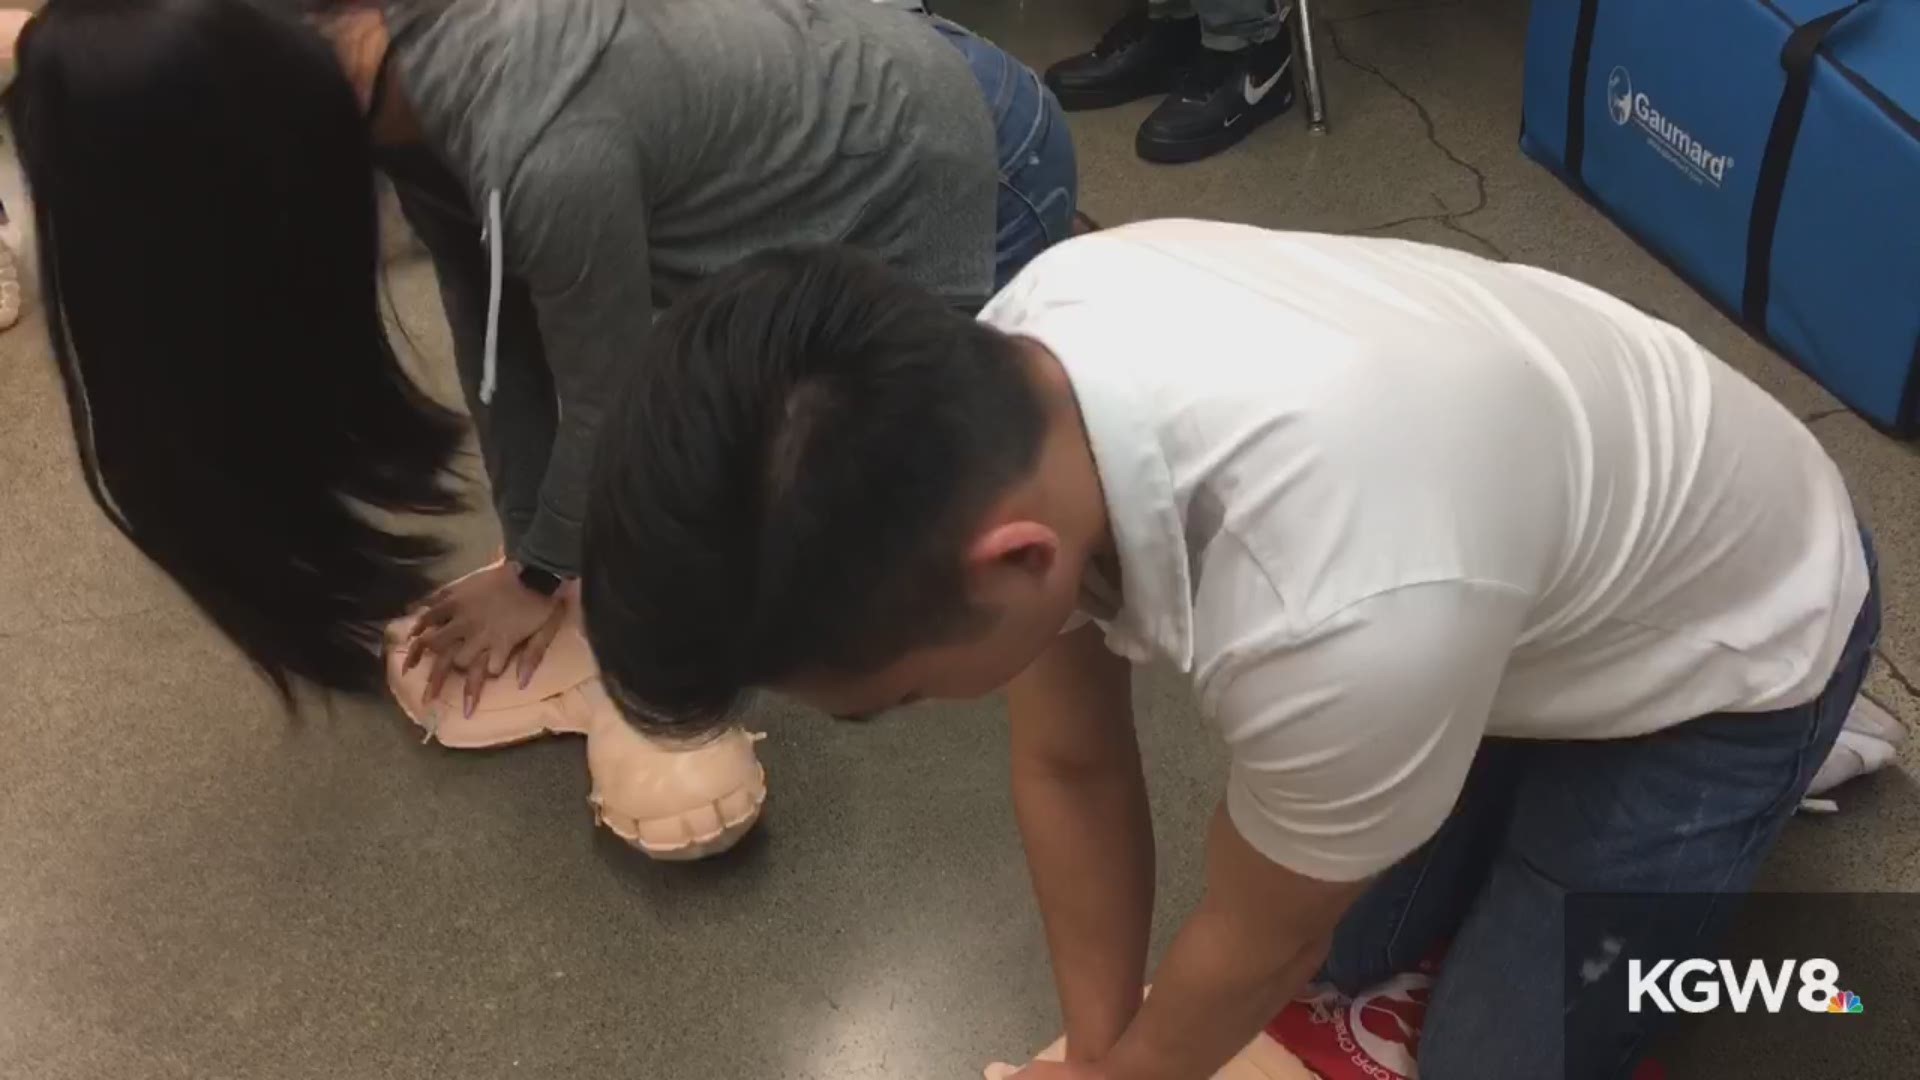 In this week's Healthier Together we talk to experts in the Pacific Northwest around CPR training. There's been a spike in interest after a NFL player's emergency.